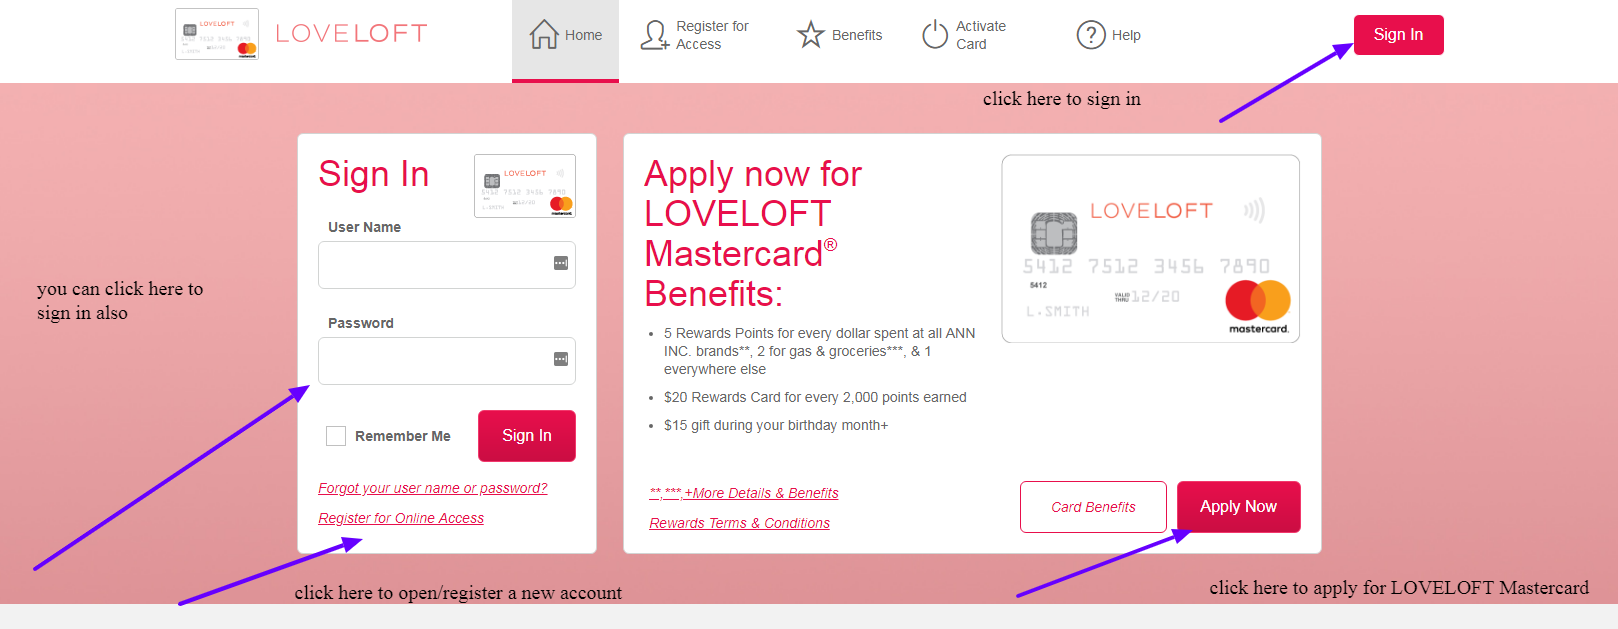 log in to your loveloft mastercardxx account